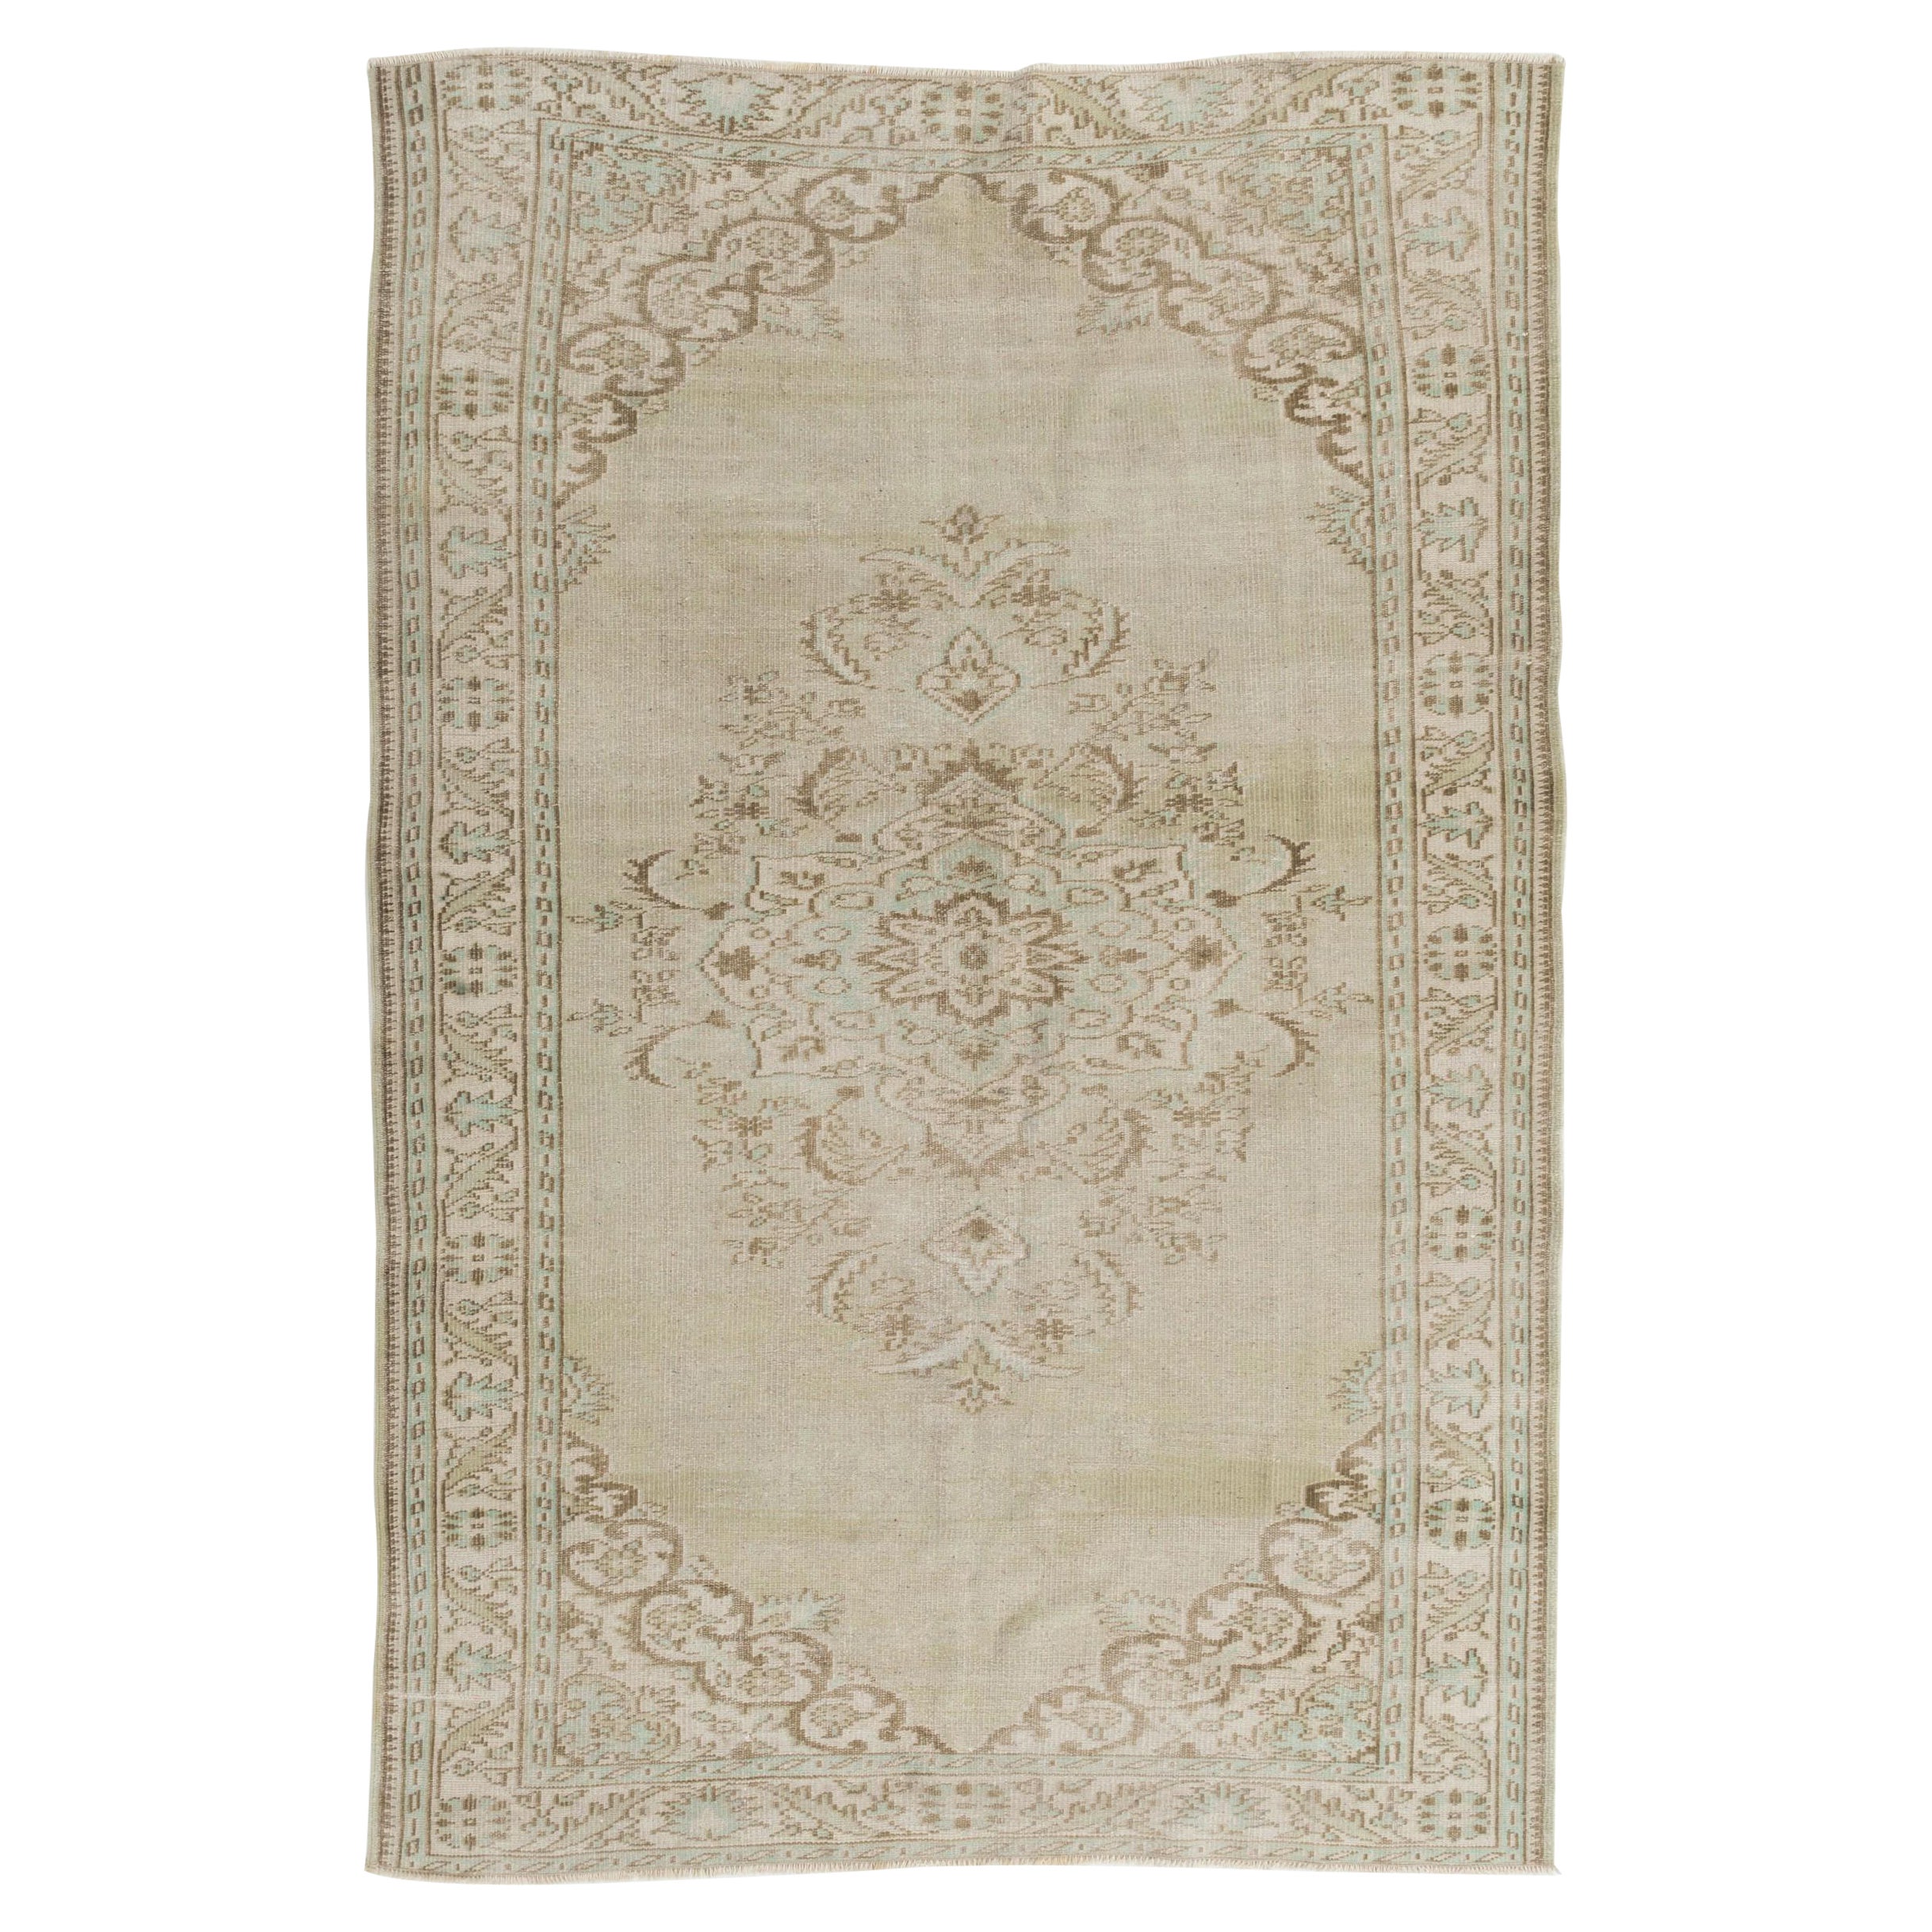 6x8.8 ft Hand Made Vintage Anatolian Oushak Rug in Neutral Colors